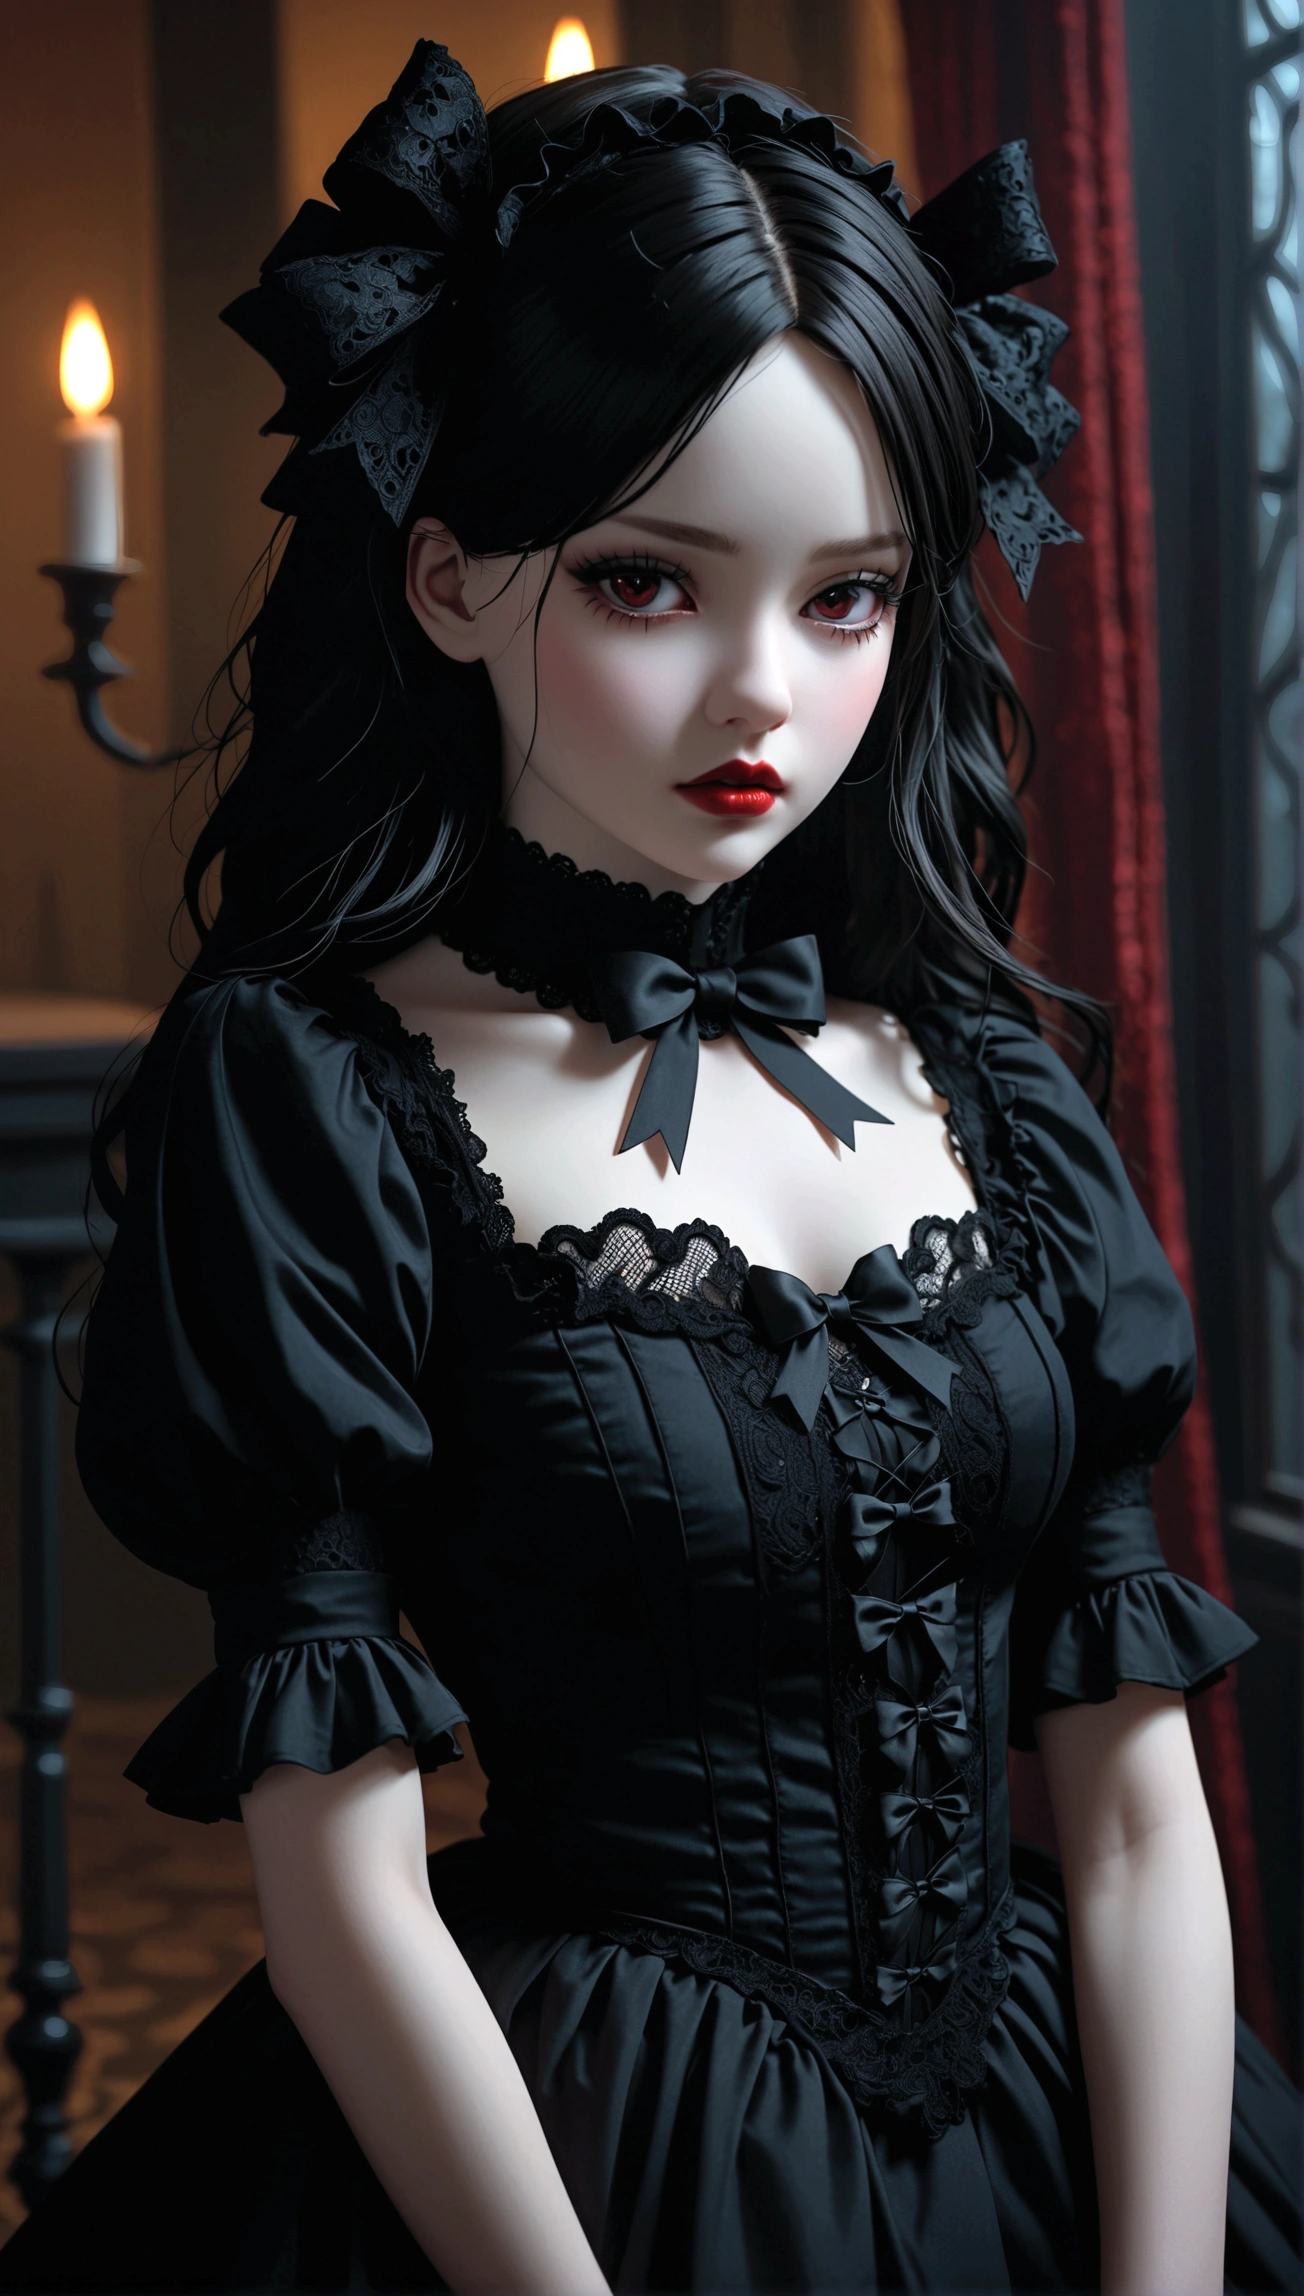 a gothic lolita girl,pale skin,red lips,porcelain doll-like face,intricate black lace Evening Dress,(whole body),Exquisite shoes,Thick stockings,ruffles,bows,high collar,long black hair,haunting gaze,dark fairy tale,dramatic lighting,moody atmosphere,cinematic,highly detailed,masterpiece,photorealistic